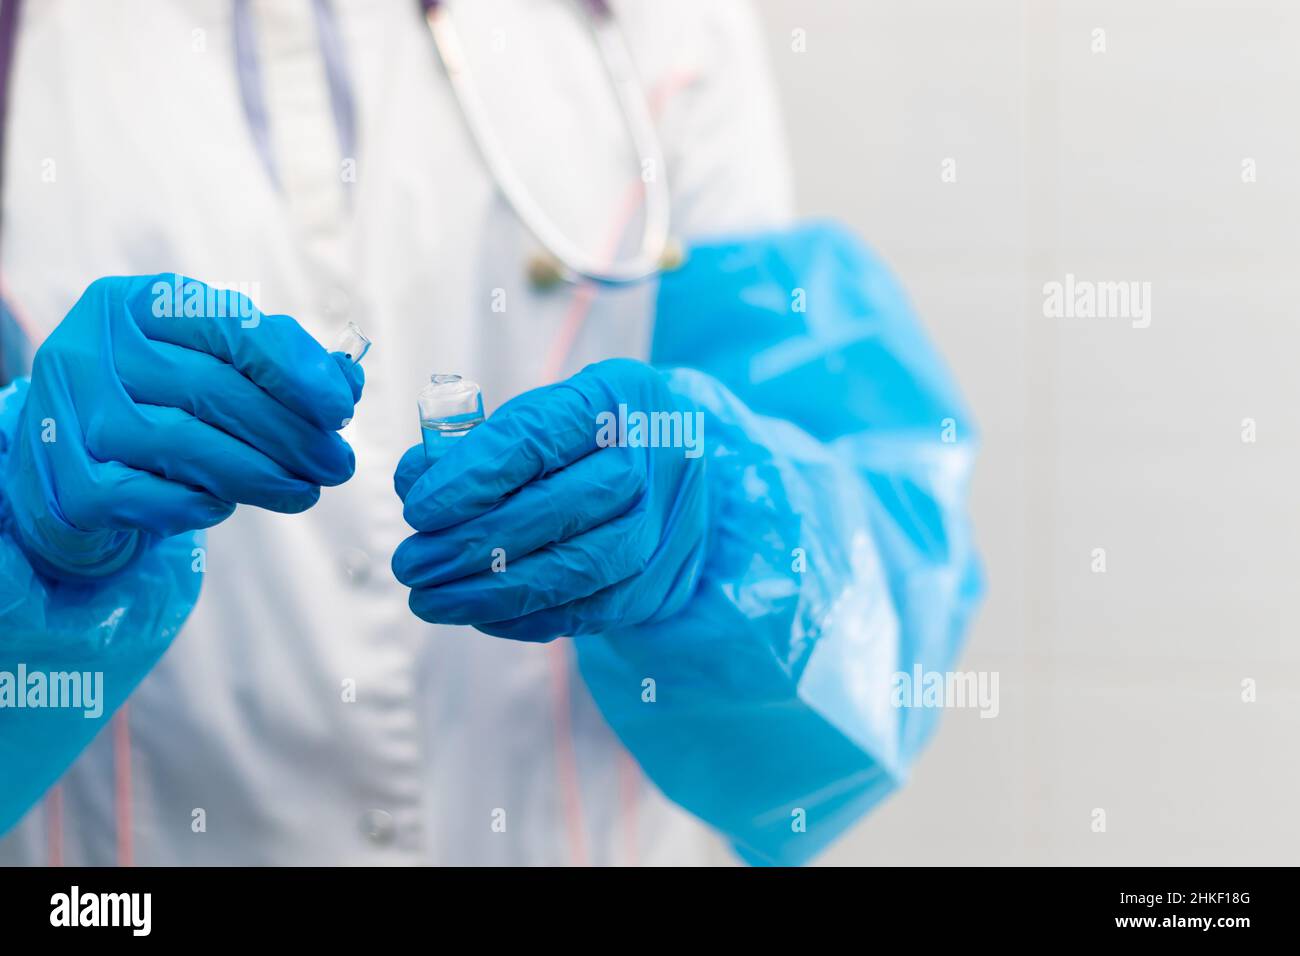 Doctor's hands in rubber medical gloves hold an ampoule of medicine in a hospital during the coronavirus pandemic. Selective focus. Close-up Stock Photo